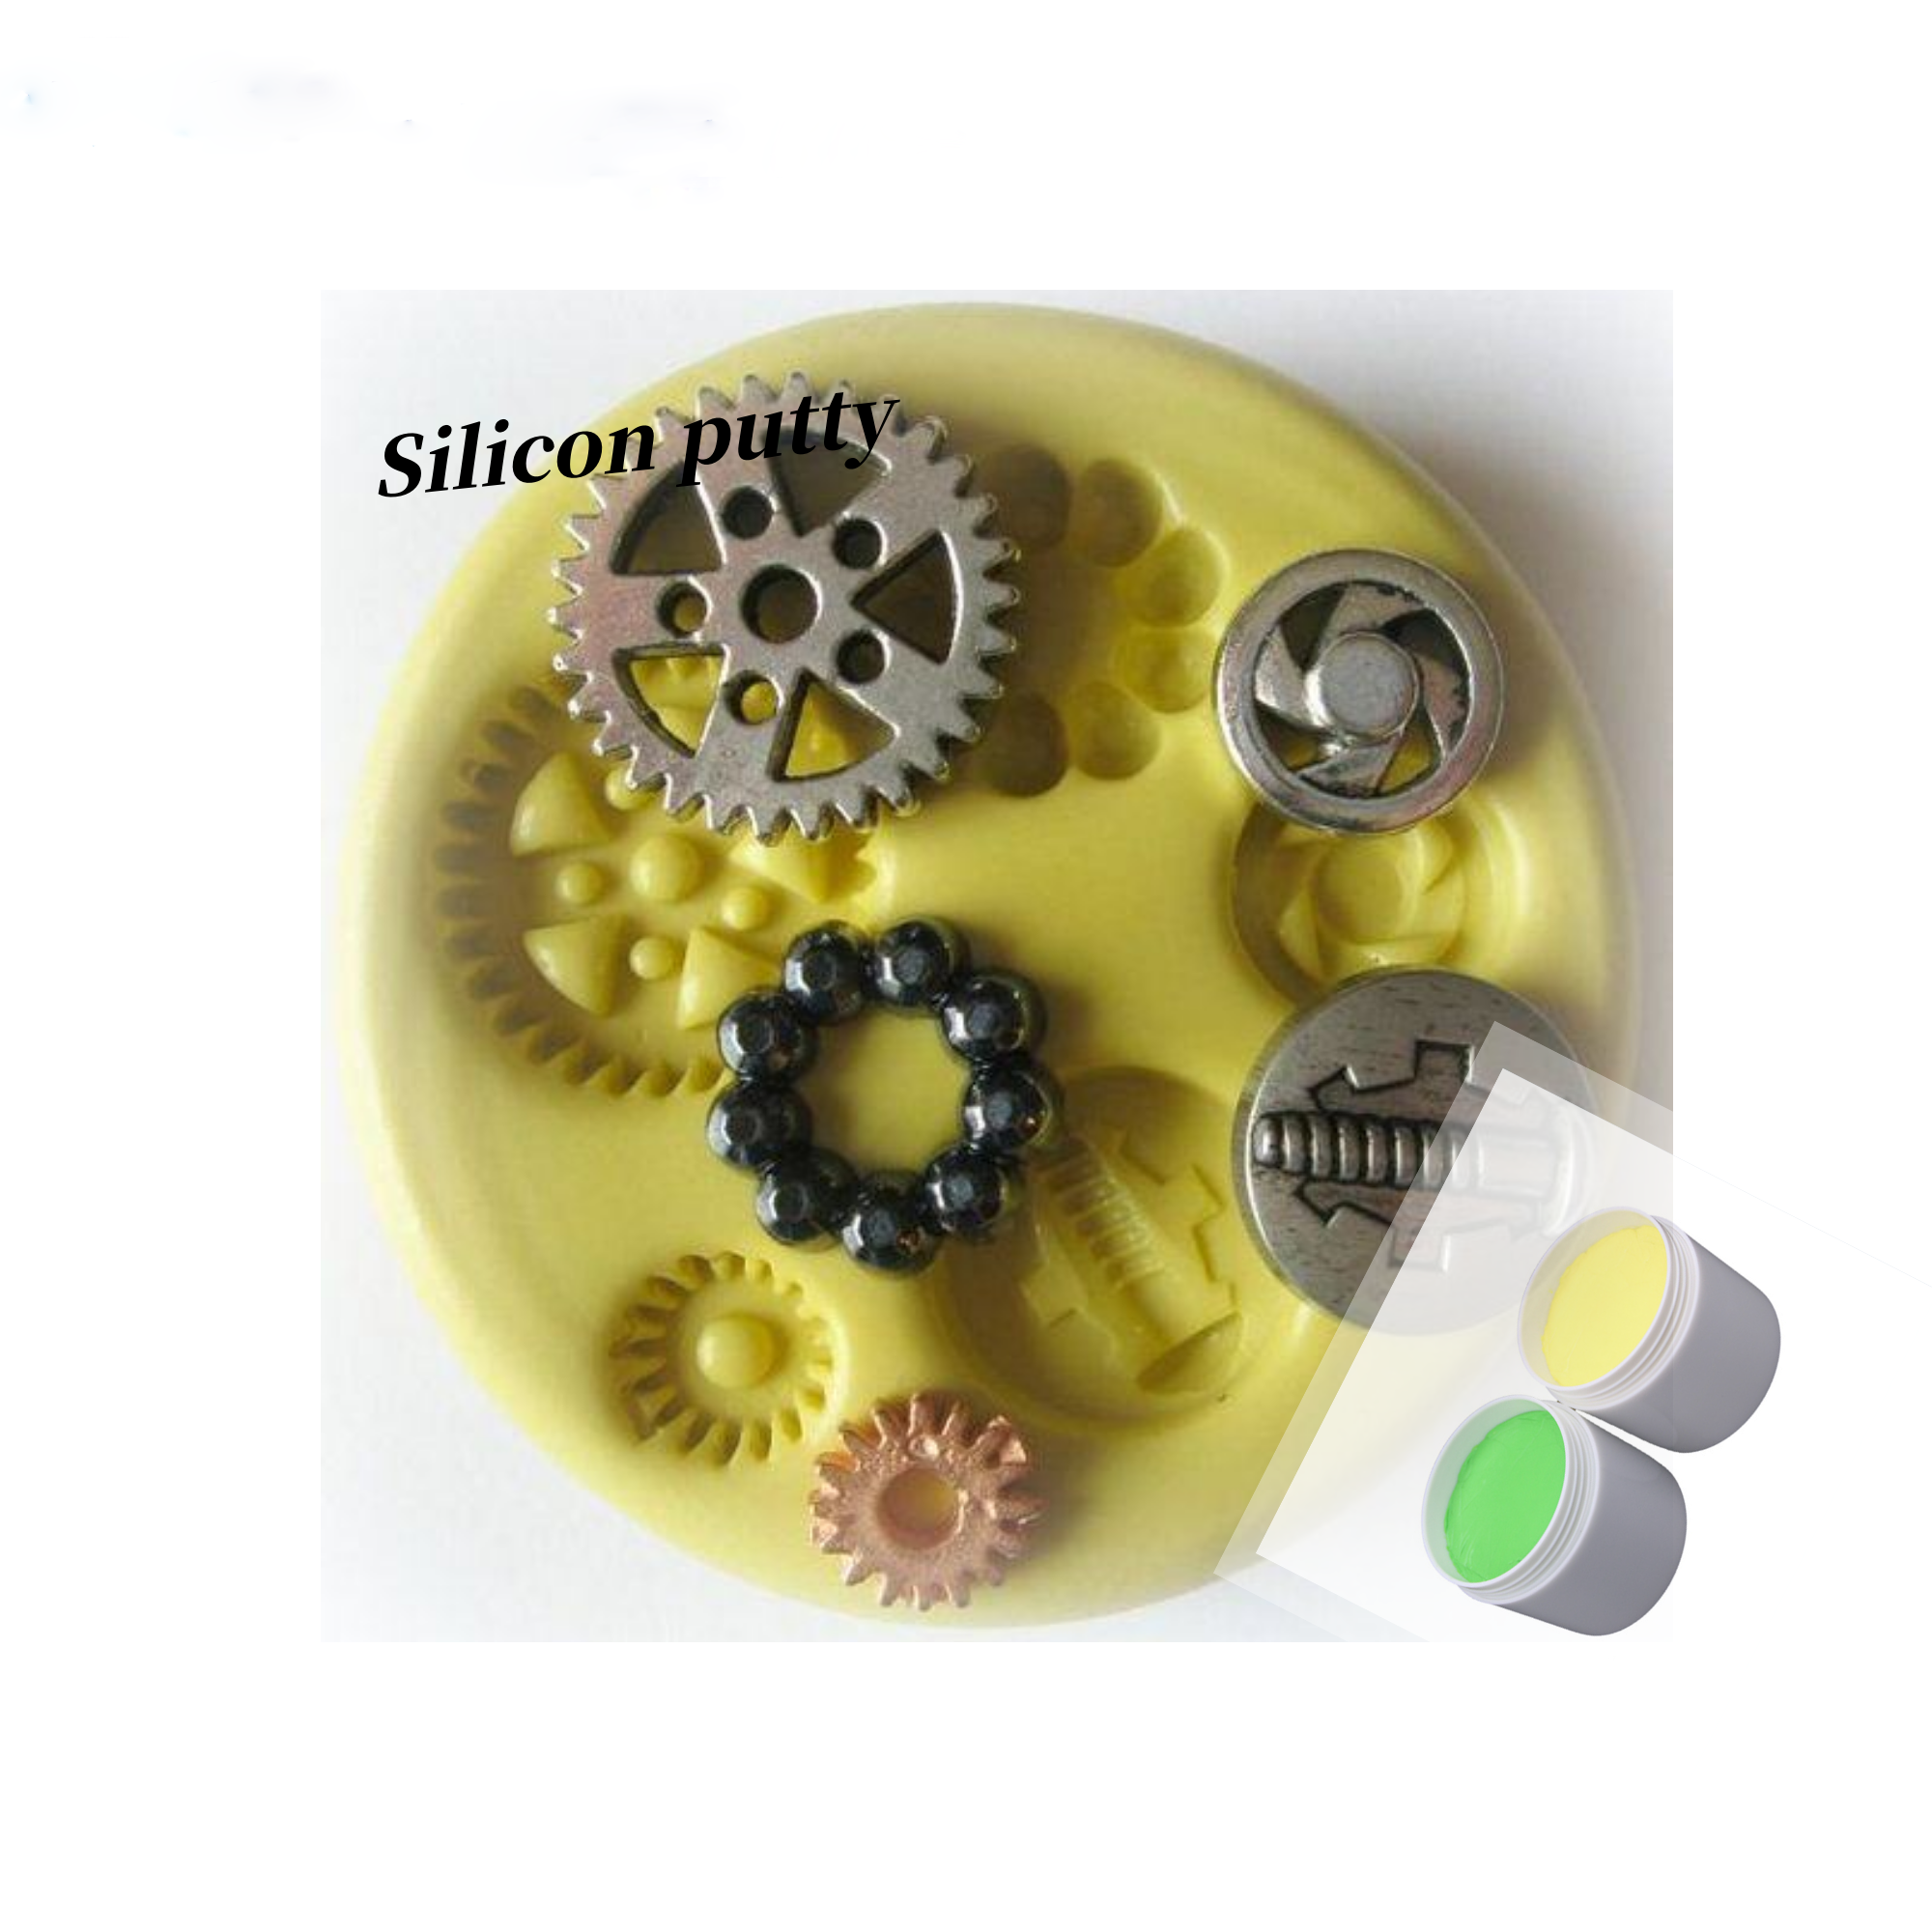 Custom Silicone putty for impression material mold making,DIY Silicone Mold Making Kit, Super Easy 1:1 Mix Mold Putty, Makes Strong Reusable Silicone Molds, Food Grade, Non-Toxic